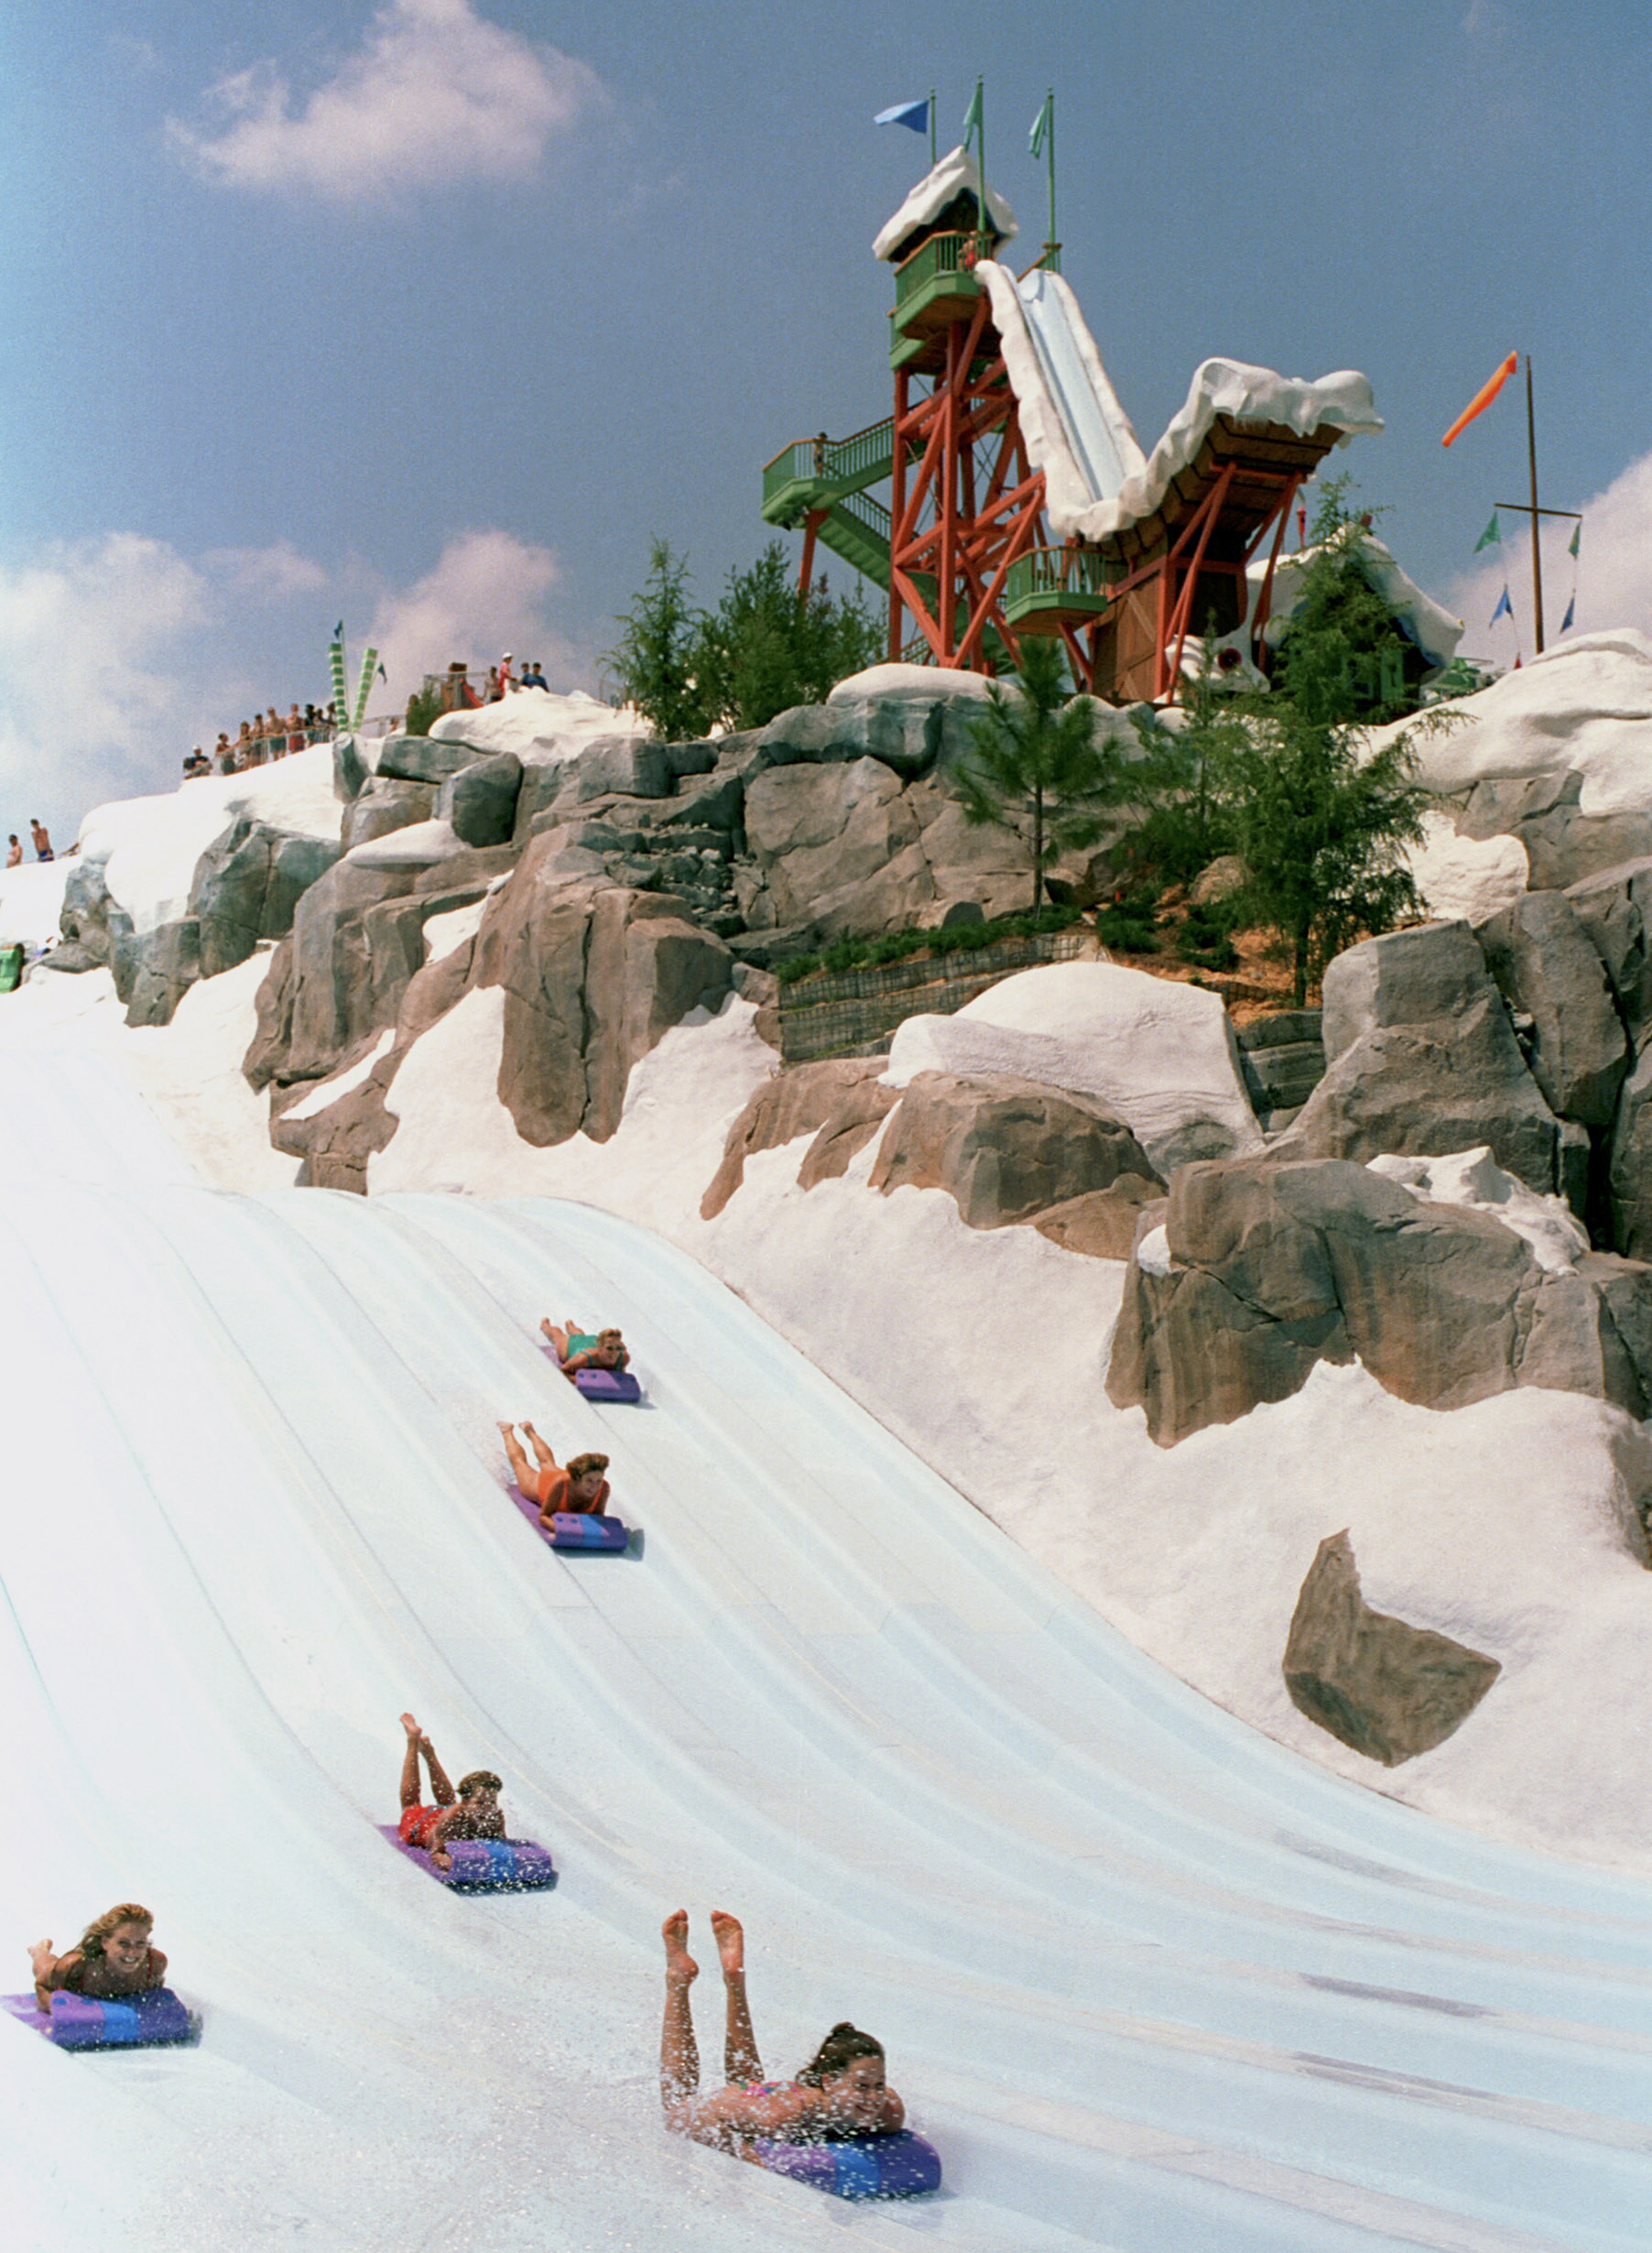 “Frozen” Games Coming to Disney’s Blizzard Beach Water Park